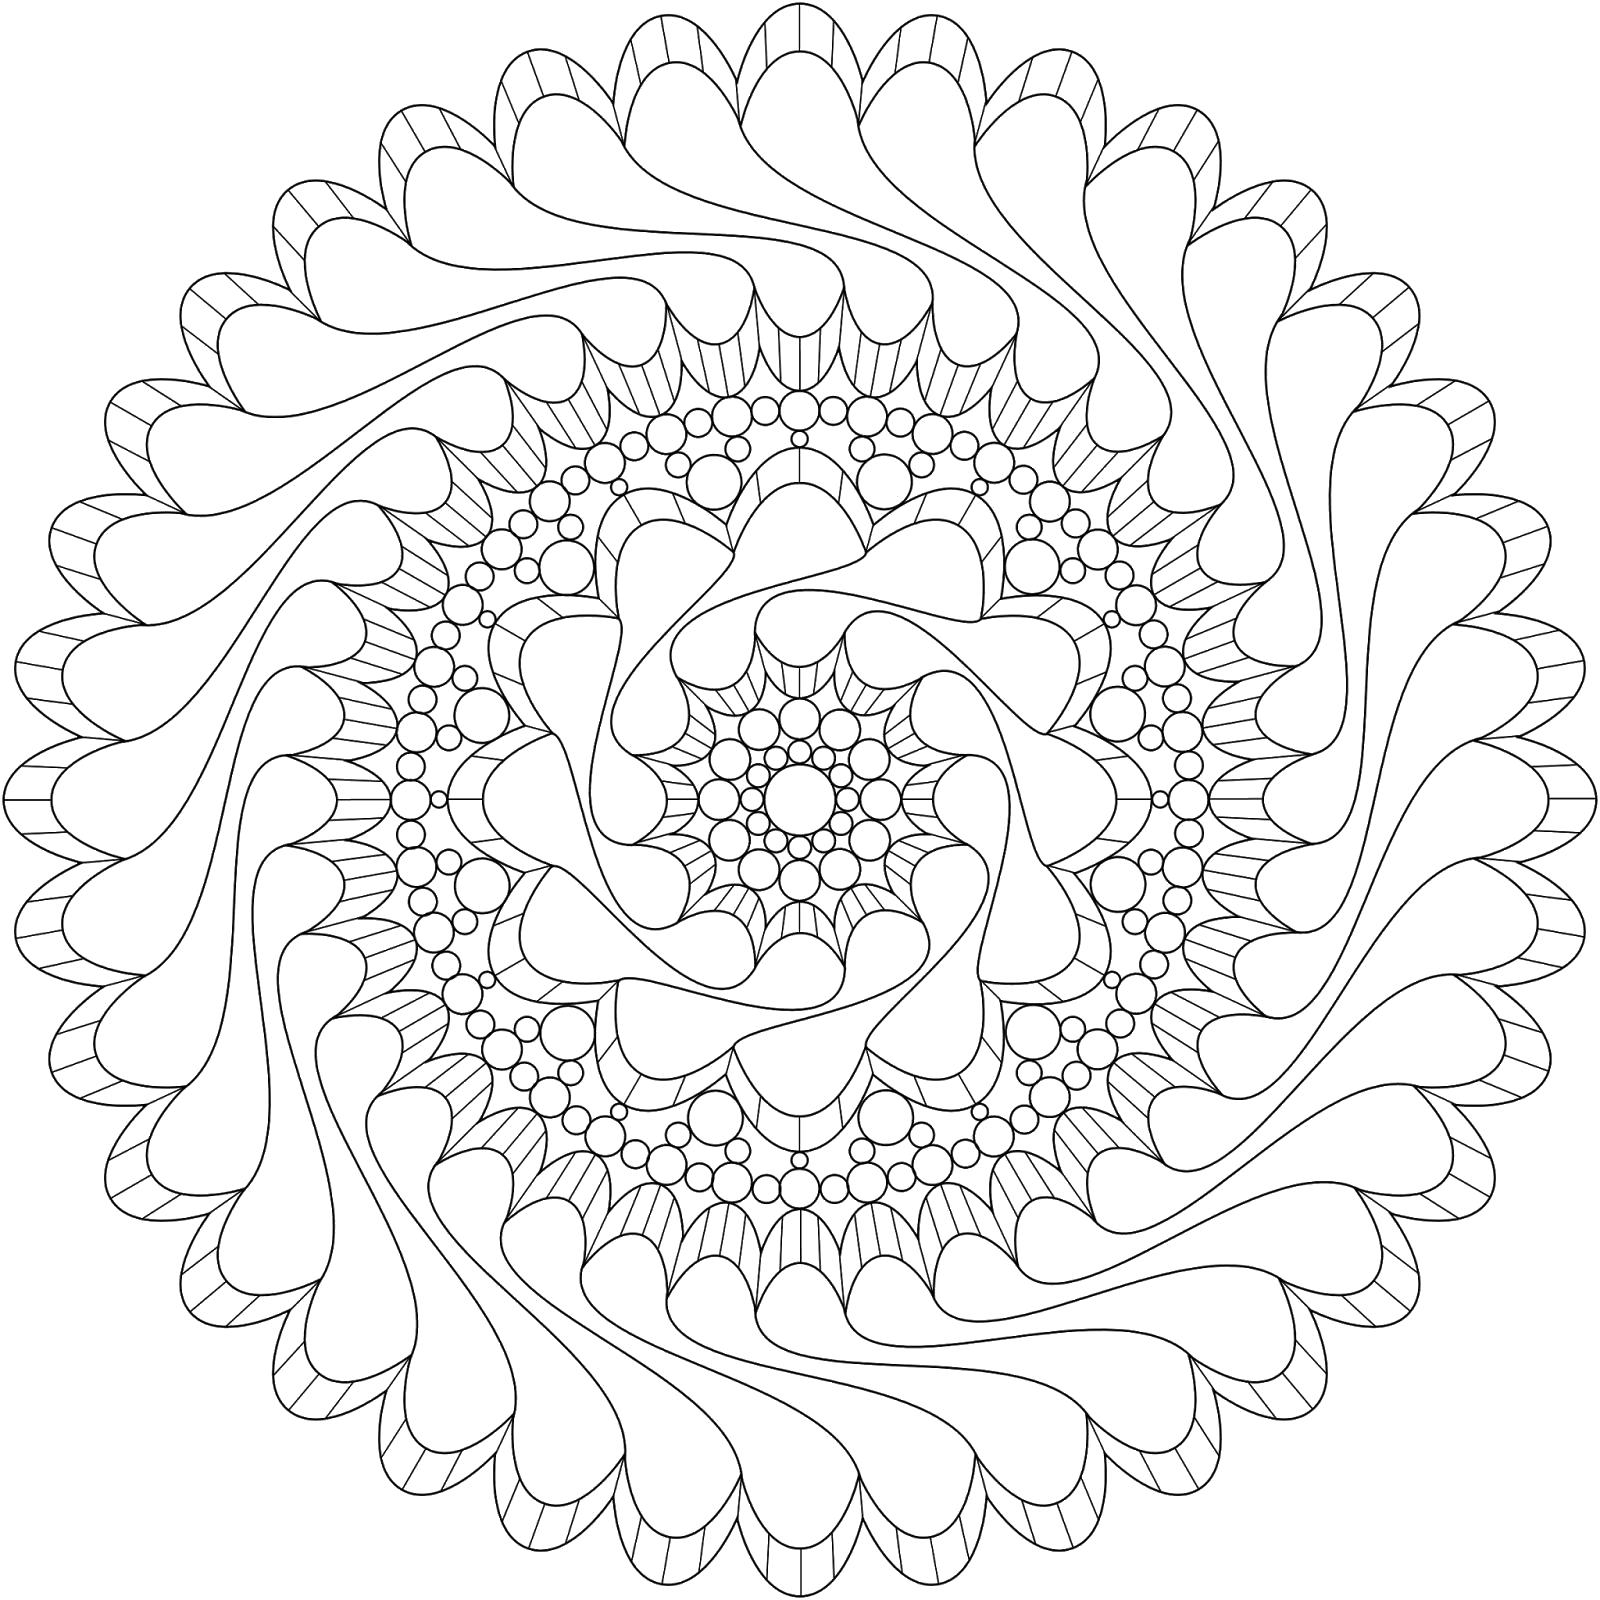 Antistress mandala Coloring Pages to download and print for free